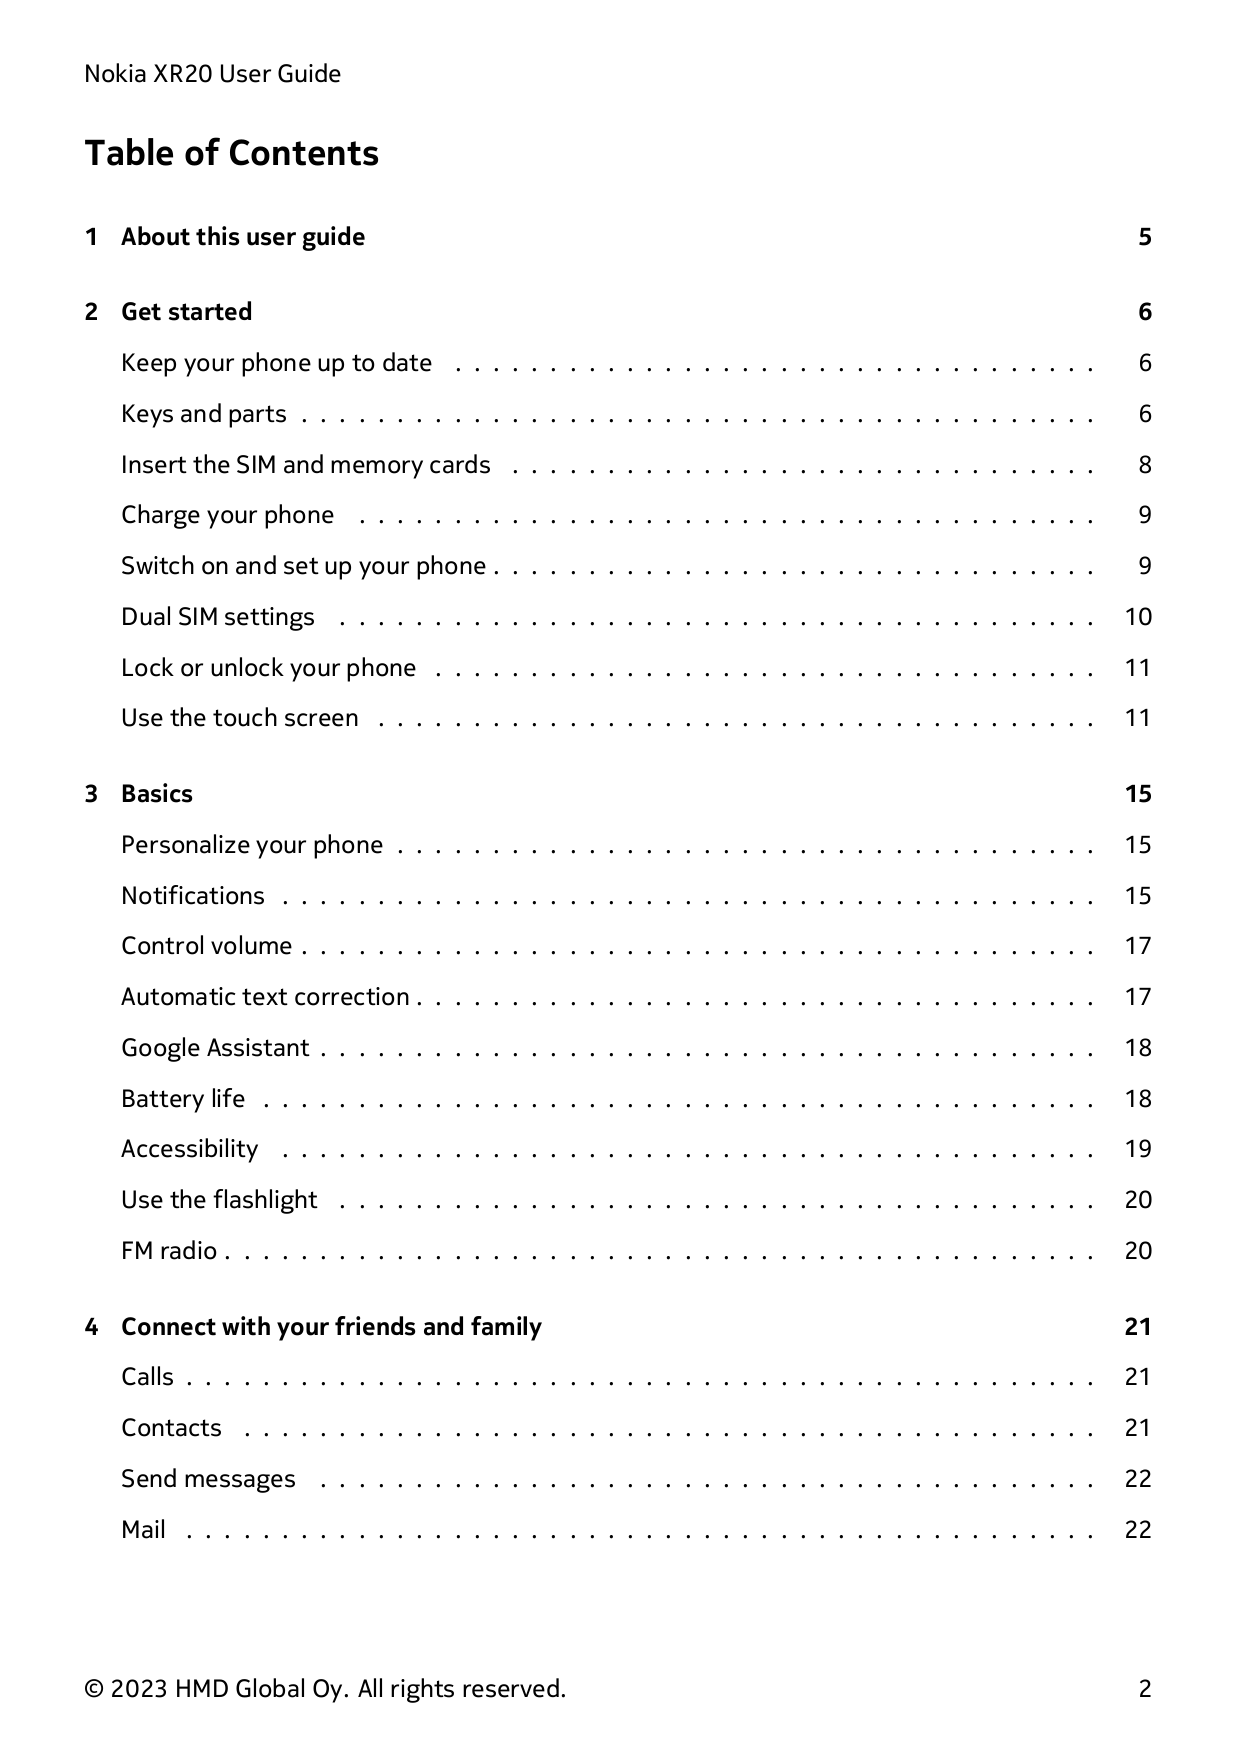 Nokia XR20 User GuideTable of Contents1 About this user guide52 Get started6Keep your phone up to date . . . . . . . . . . . . .